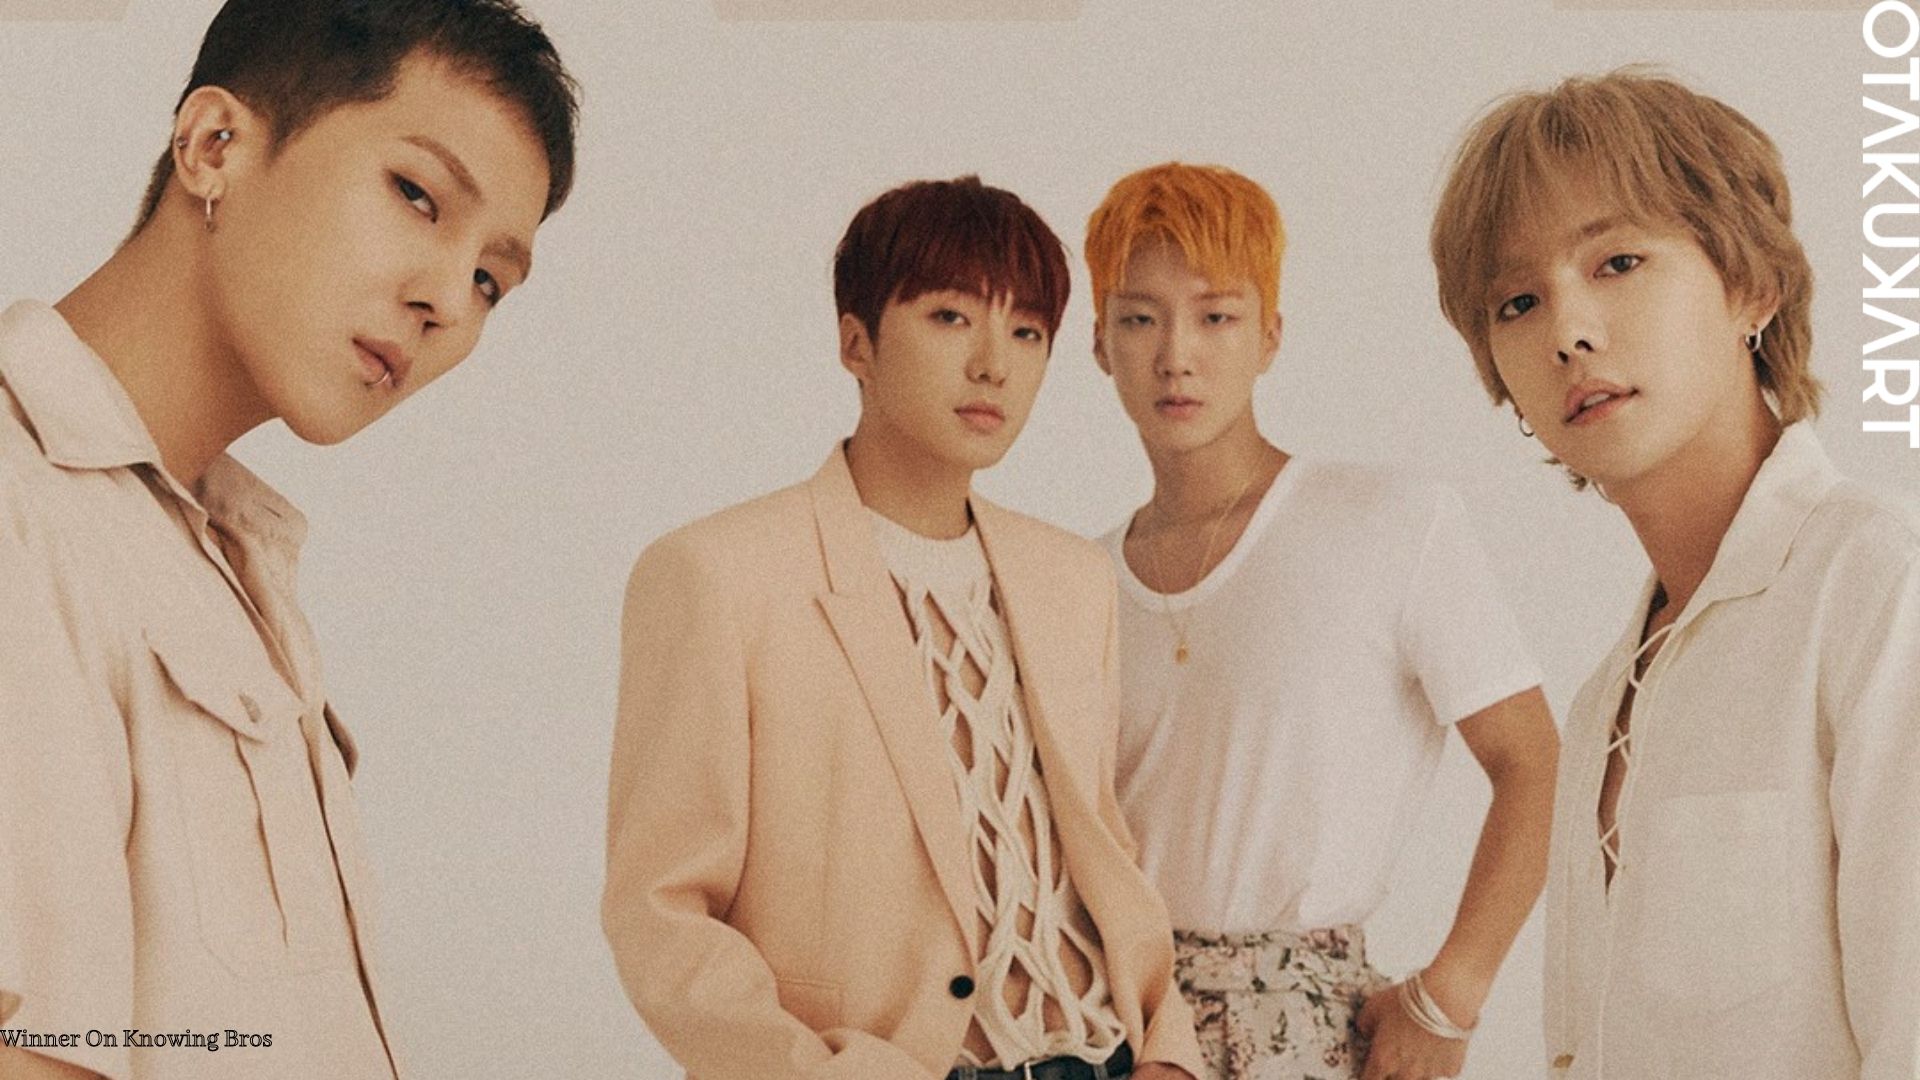 WINNER To Appear in The Upcoming Episode of ‘Knowing Bros’